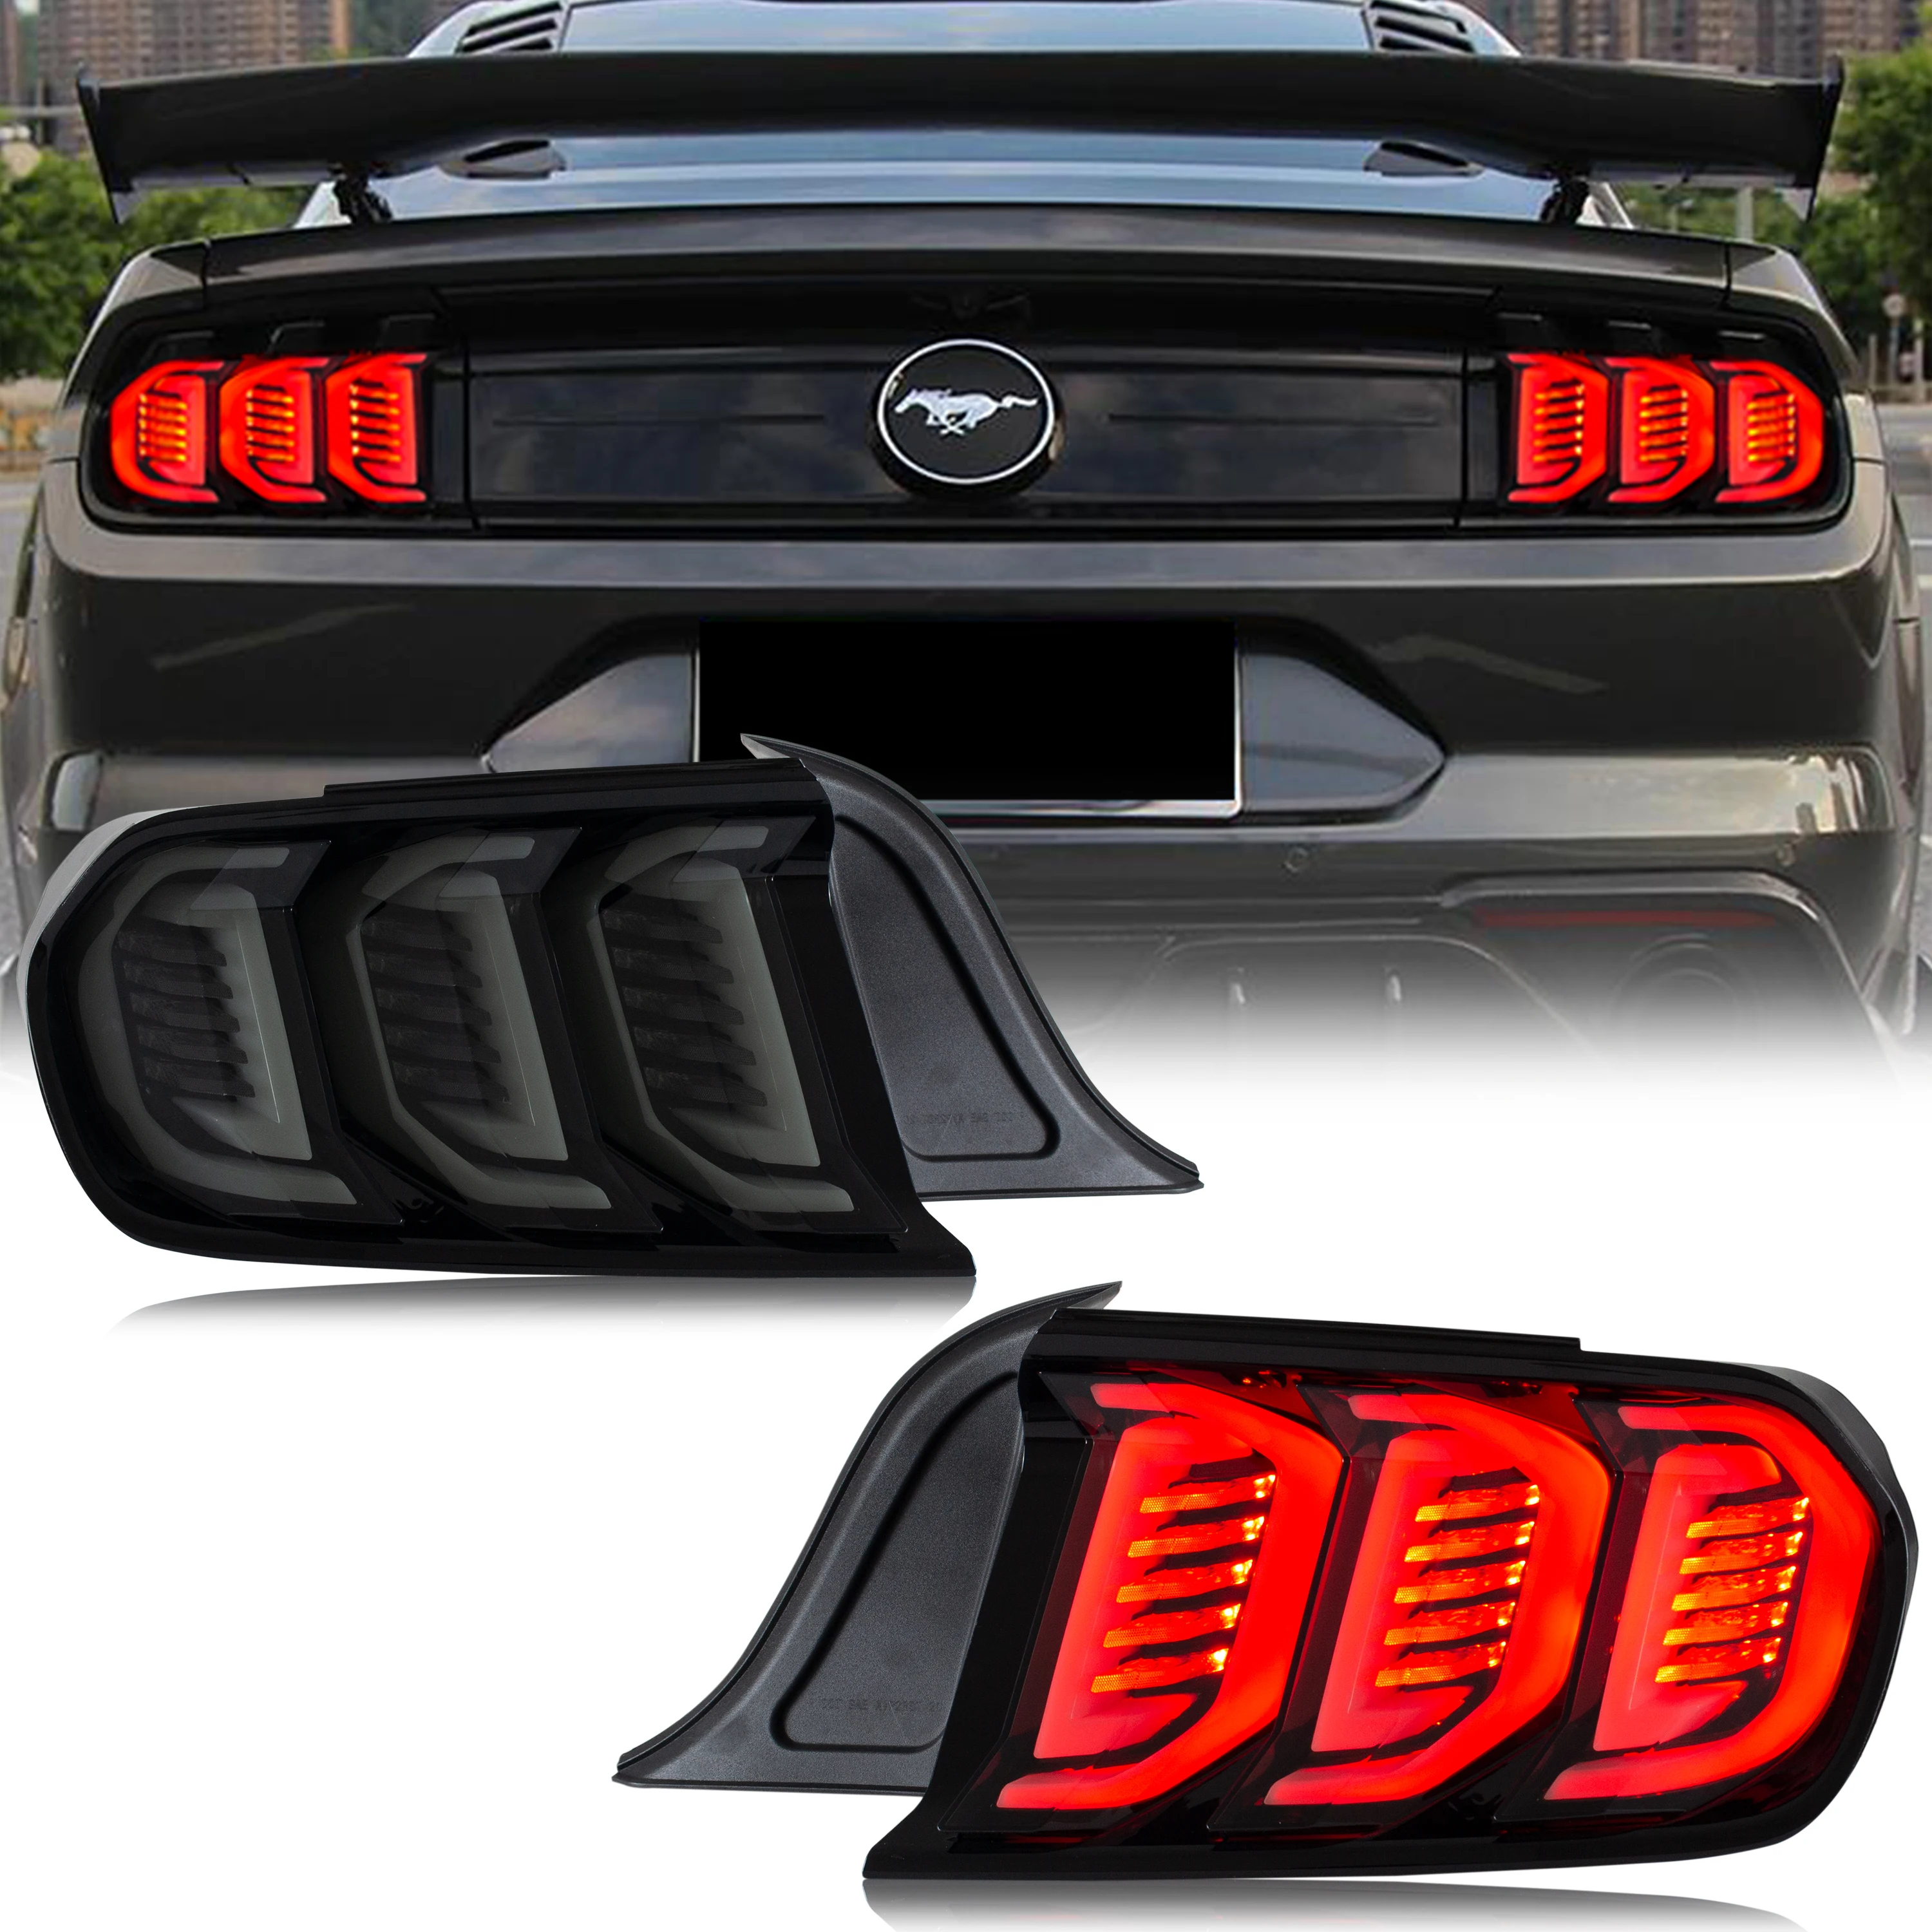 LED Tail Lights for Ford Mustang 2016-2022 sequential Indicator